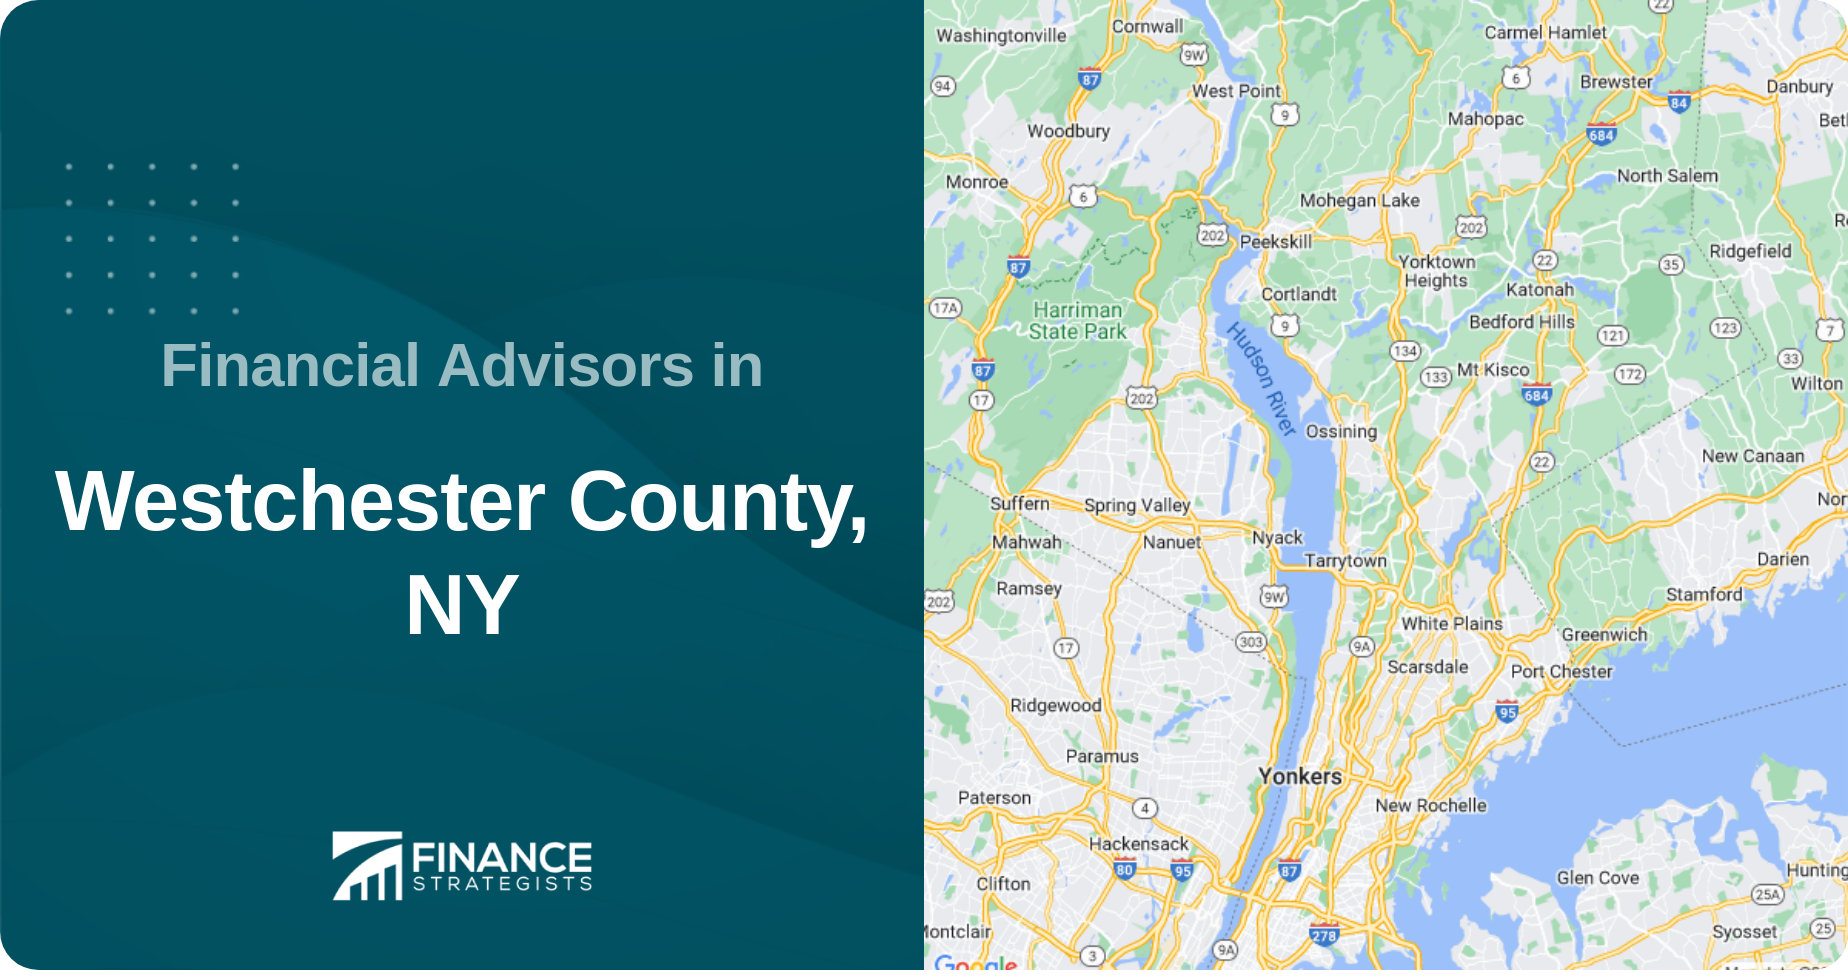 Financial Advisors in Westchester County, NY